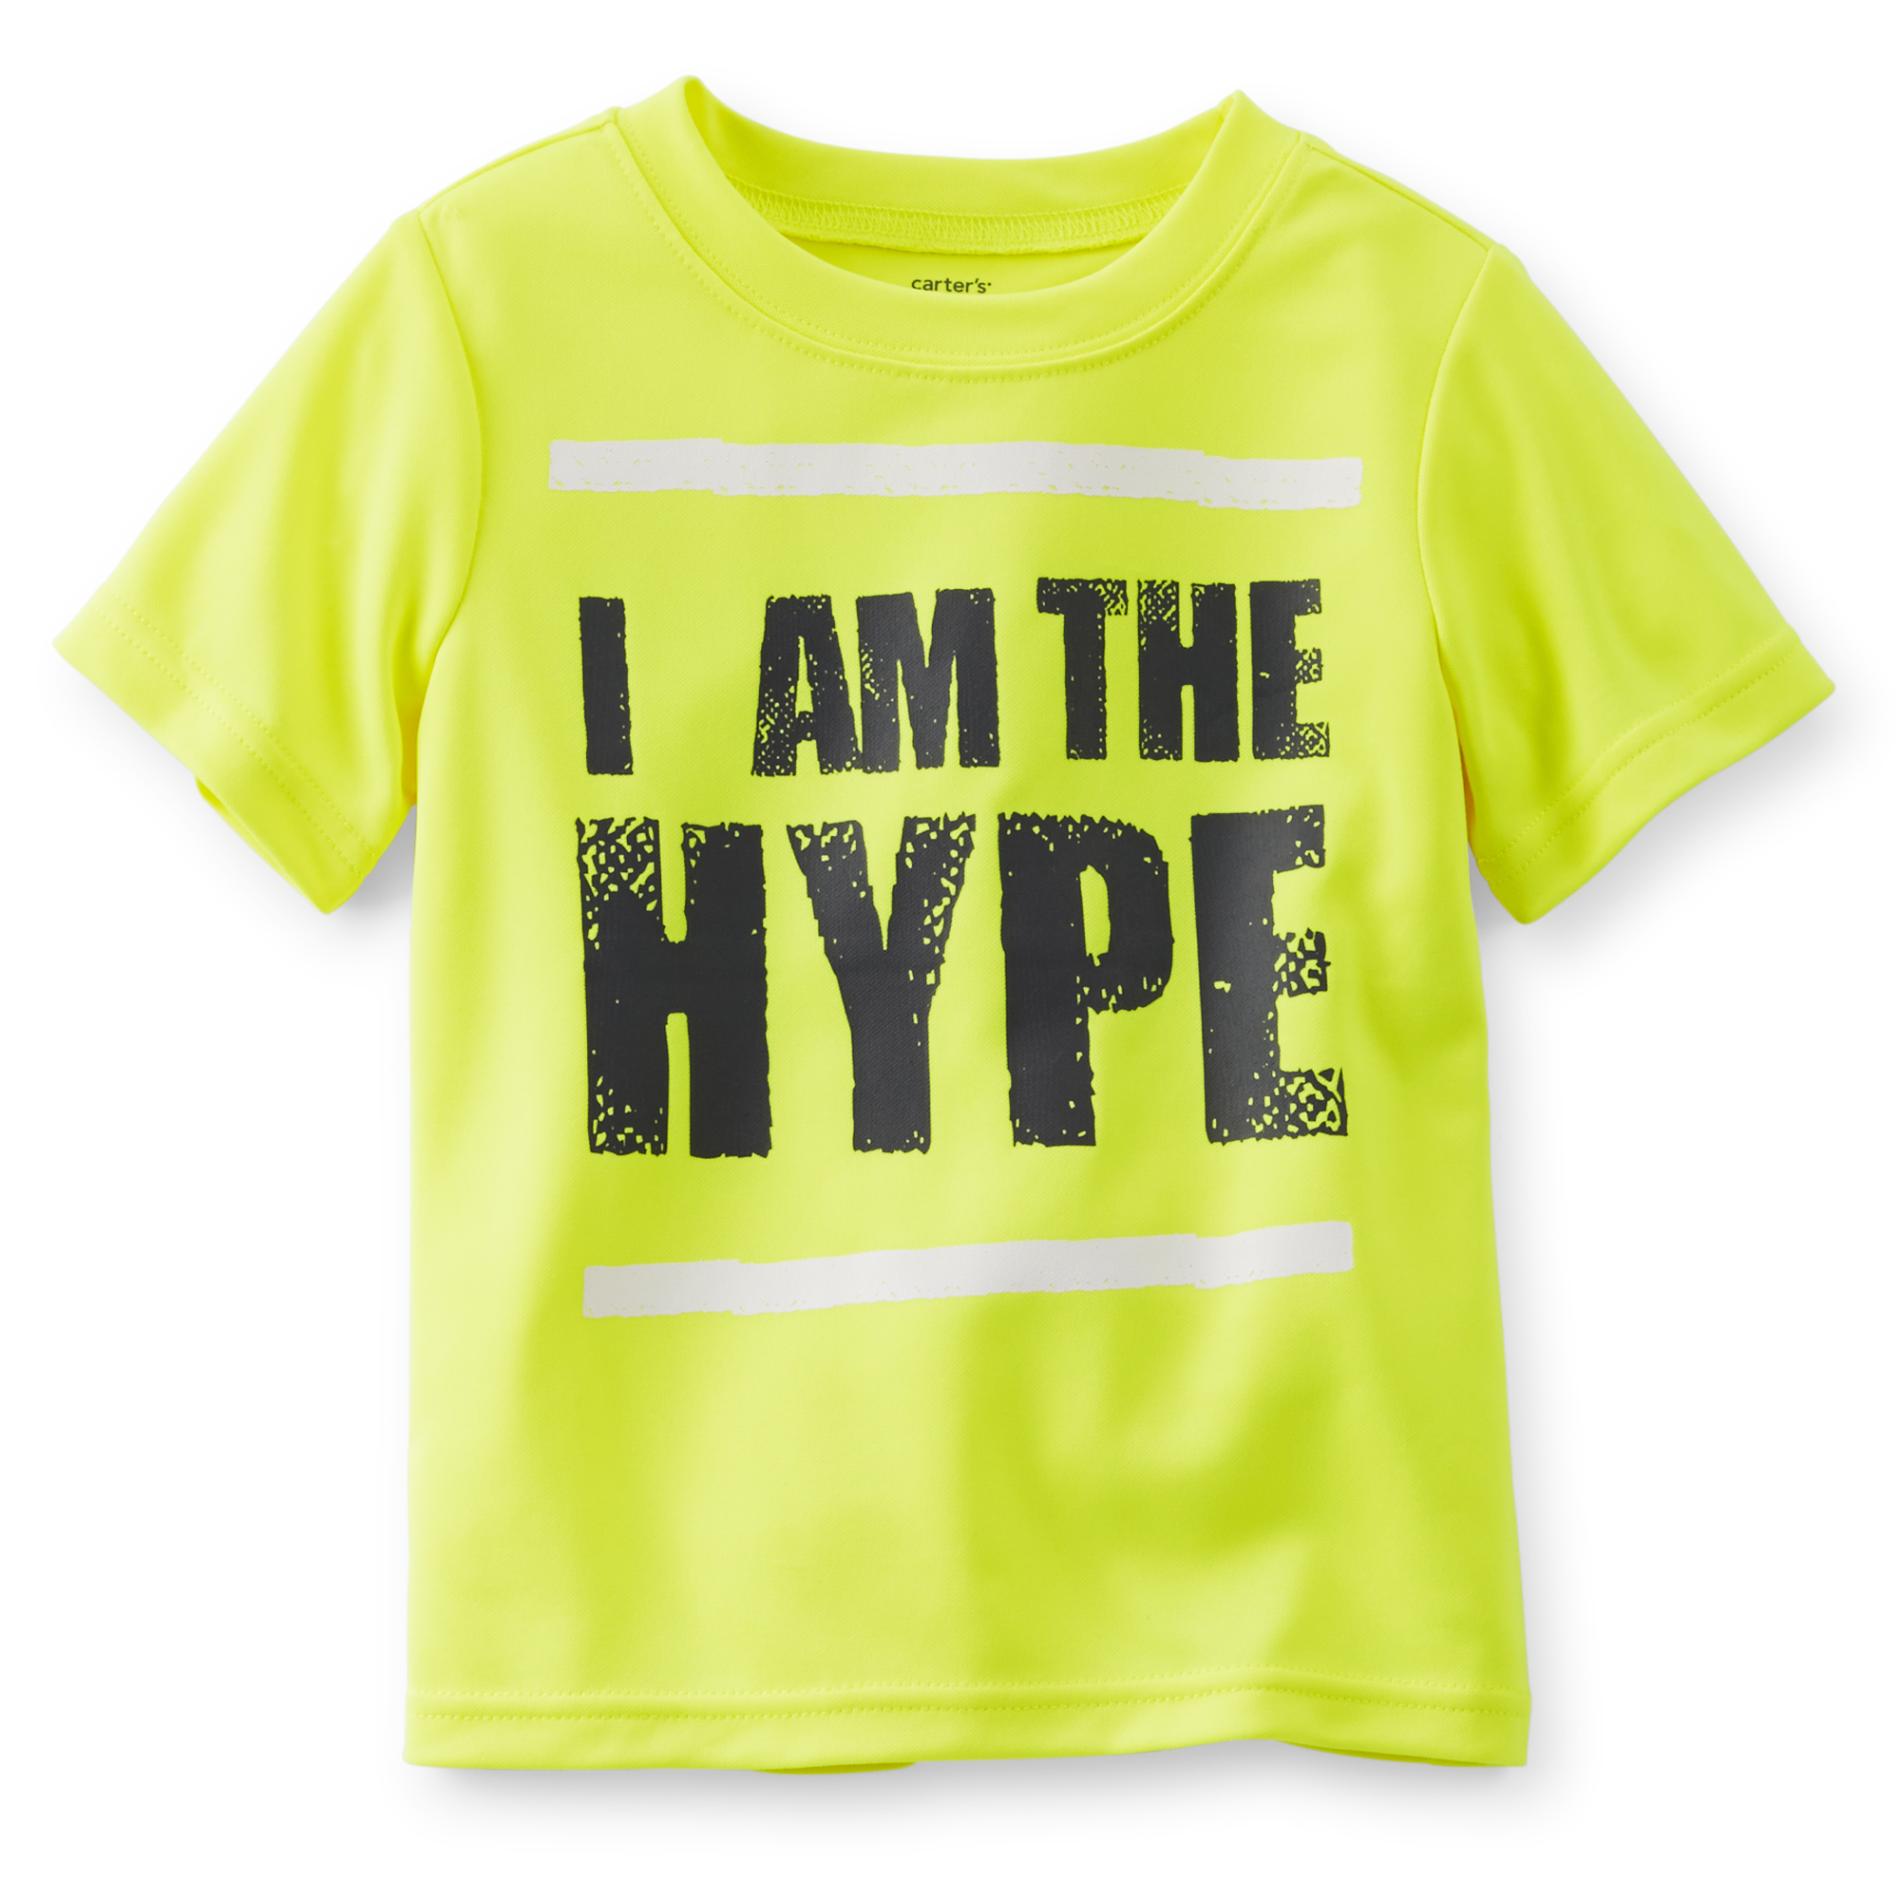 Carter's Toddler Boy's Graphic T-Shirt - I Am the Hype